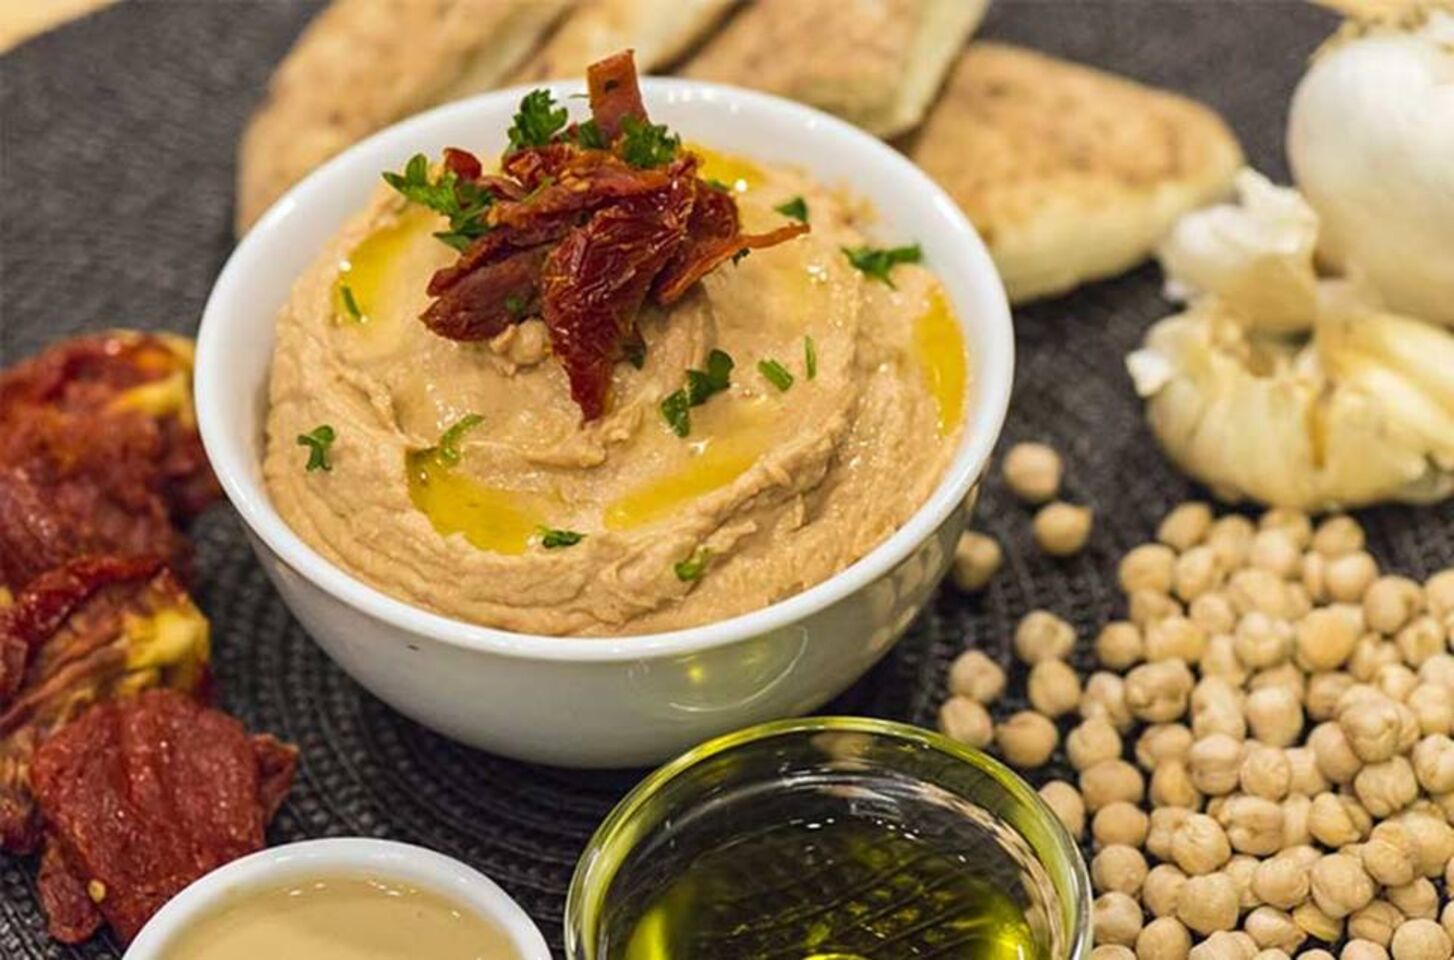 A photo of The Hummus and Pita co.